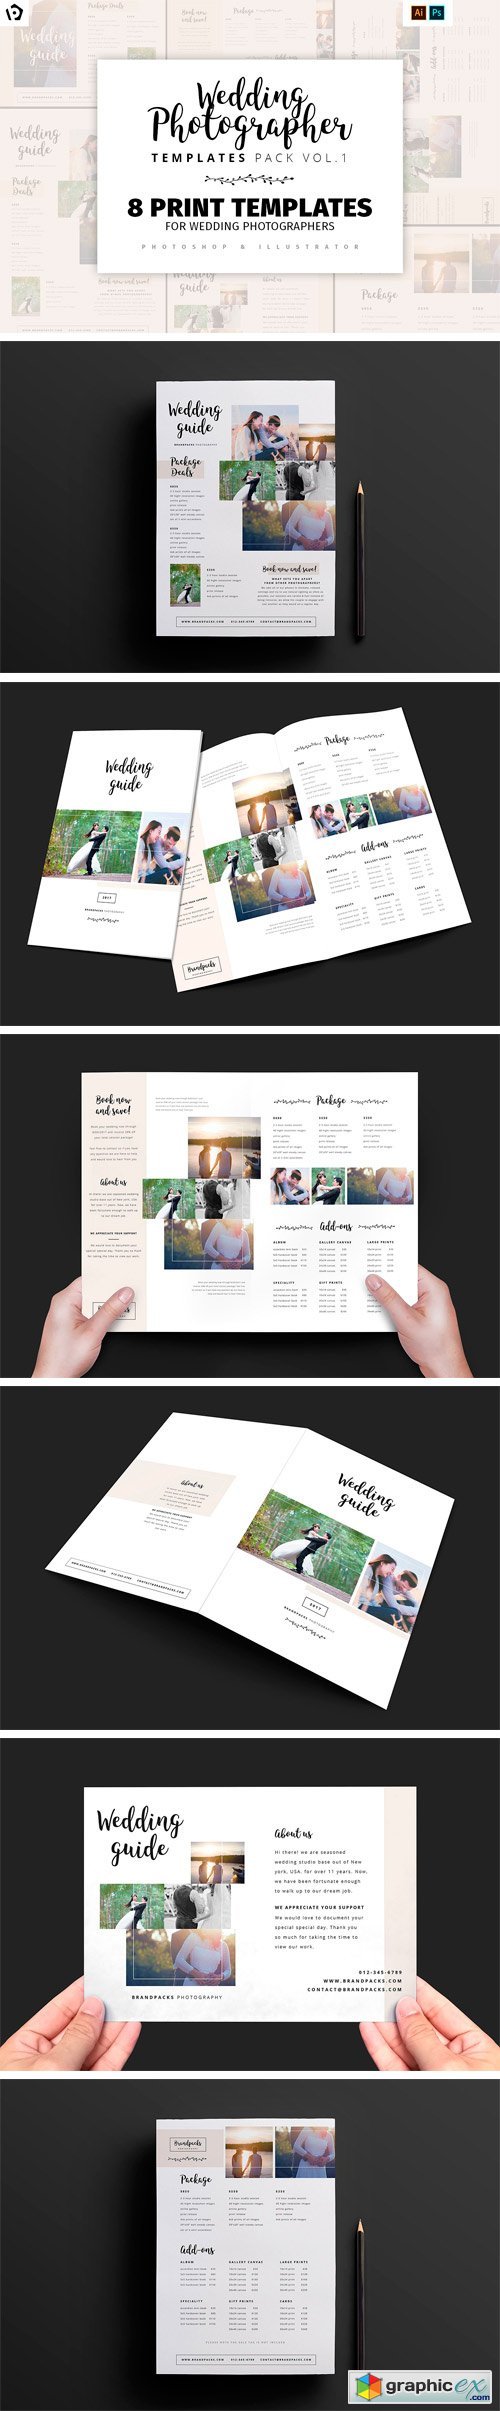 Wedding Photography Templates Pack 1